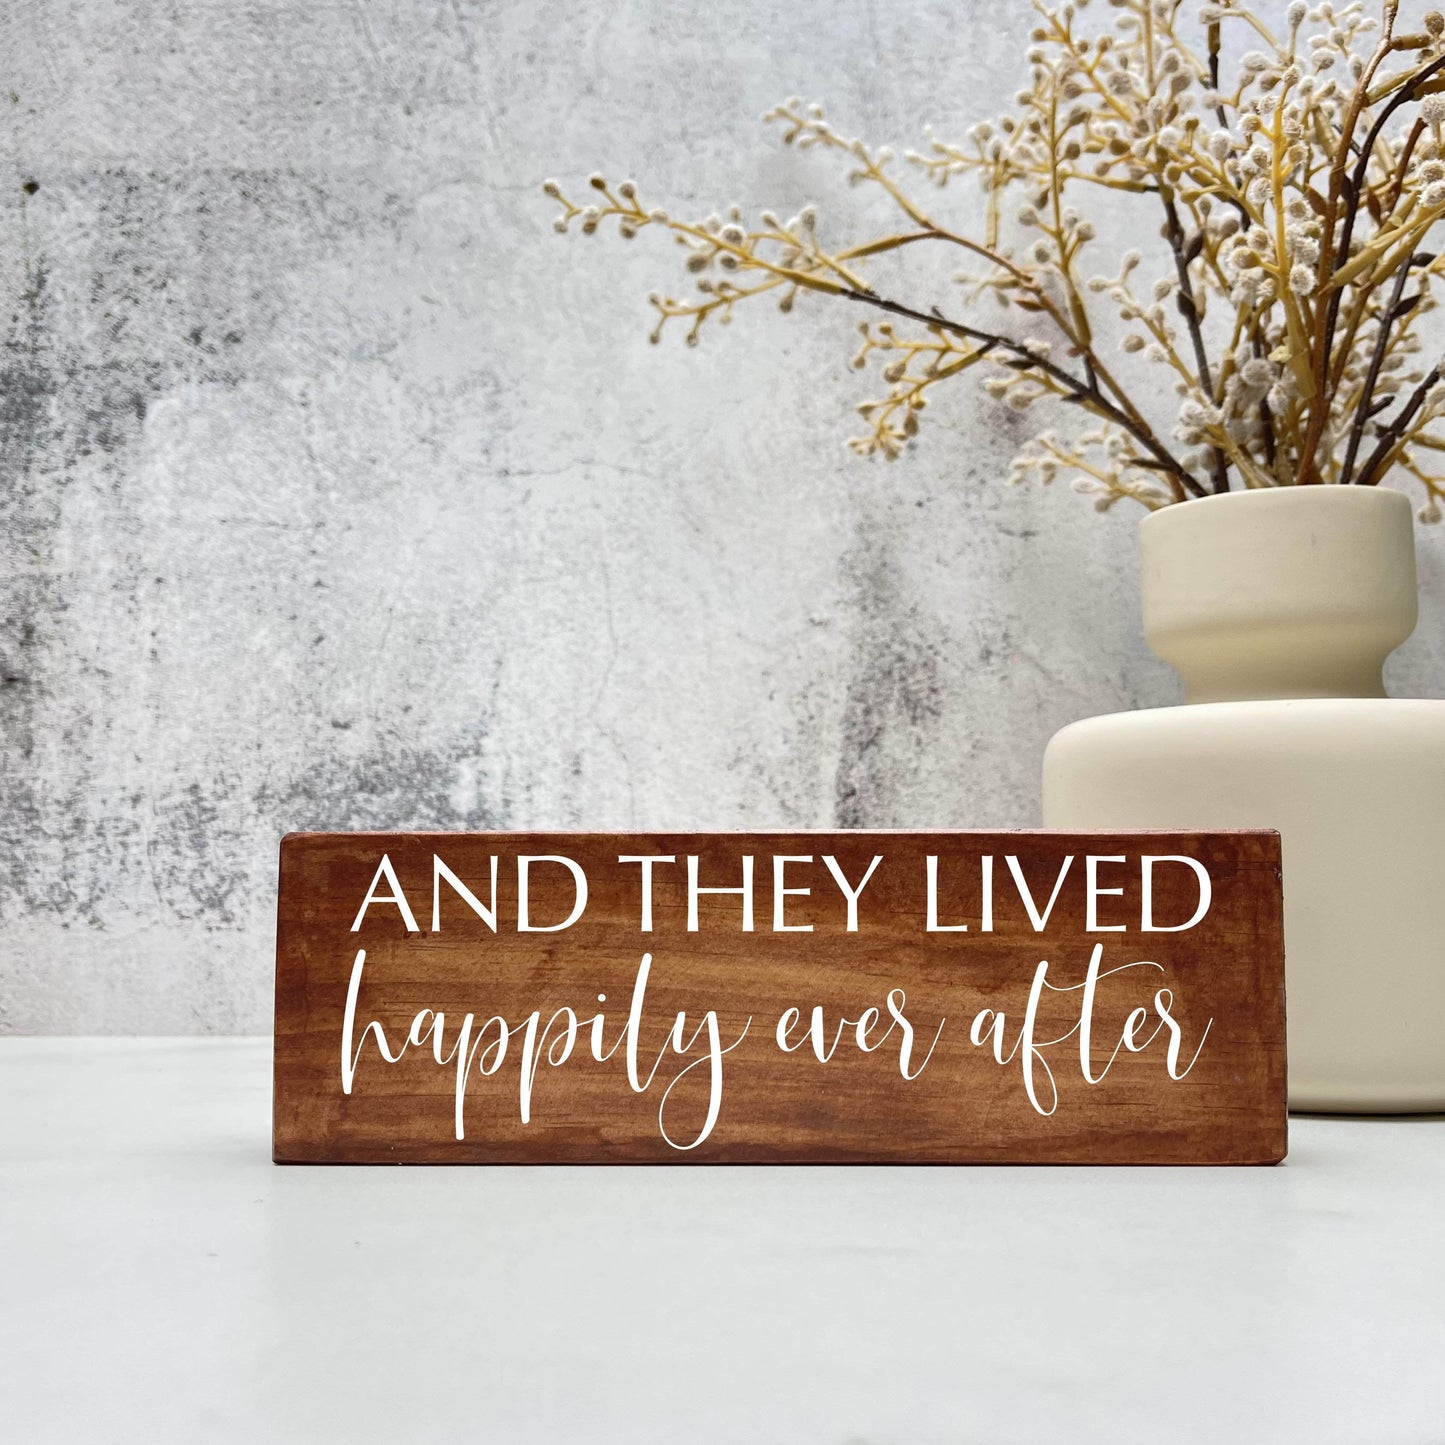 And they lived happily ever after wood sign, love sign, couples gift sign, quote sign, home decors